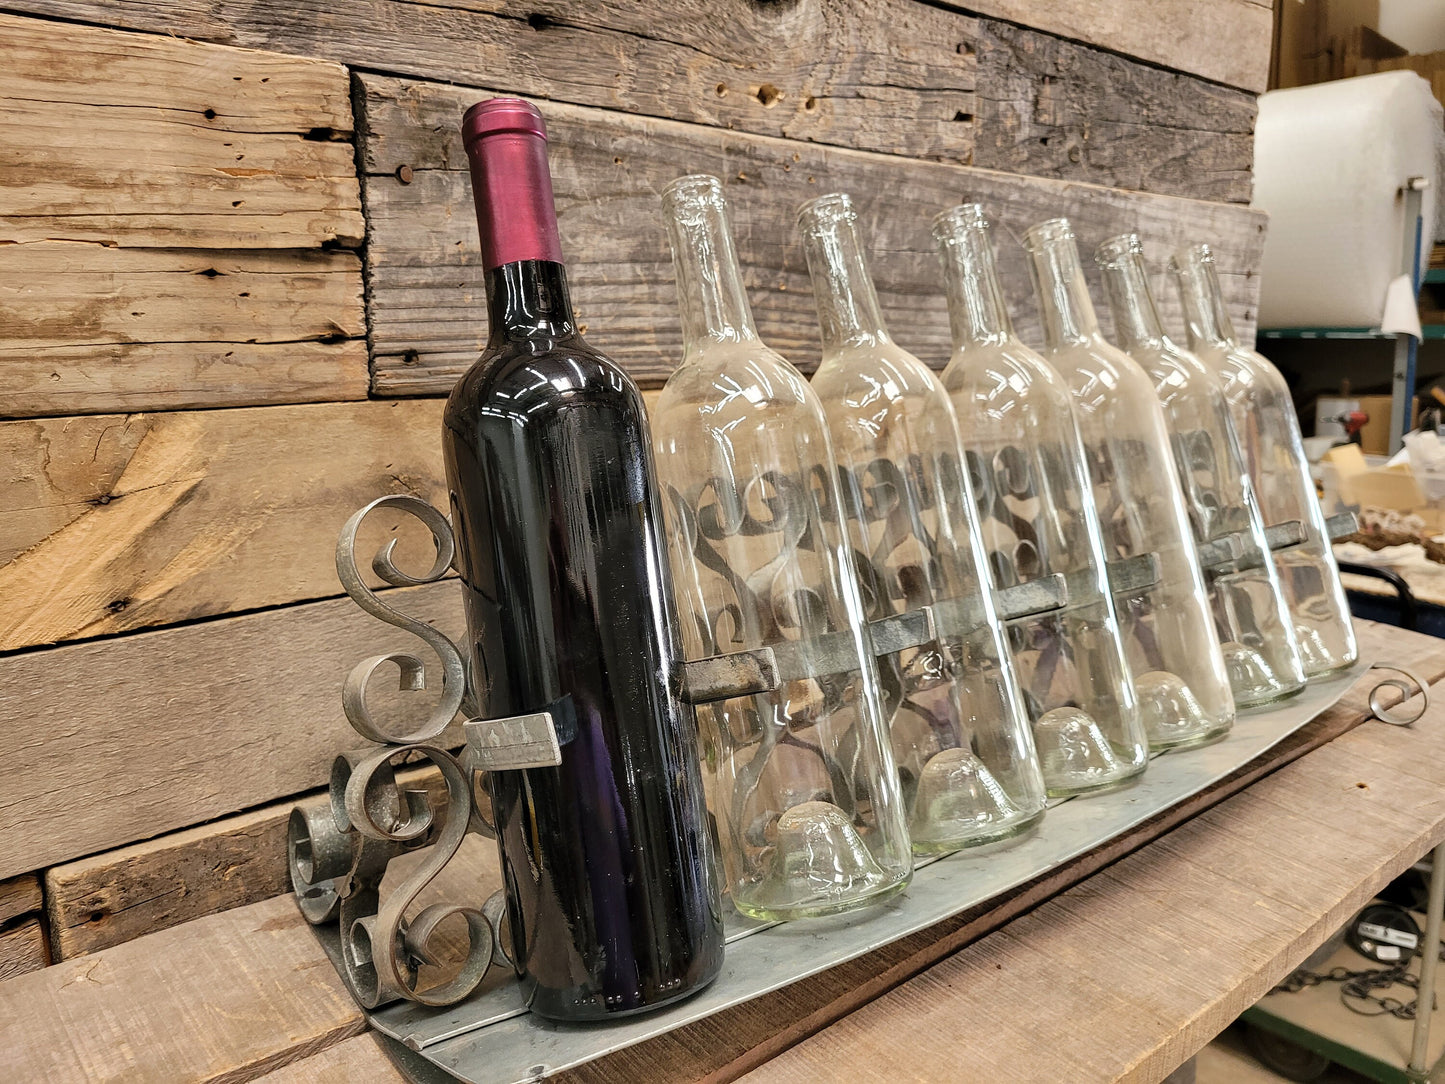 SALE! Counter Top Wine Bottle Holder - Heart Spirals - Made from local Napa California wine barrel rings. 100% Recycled!